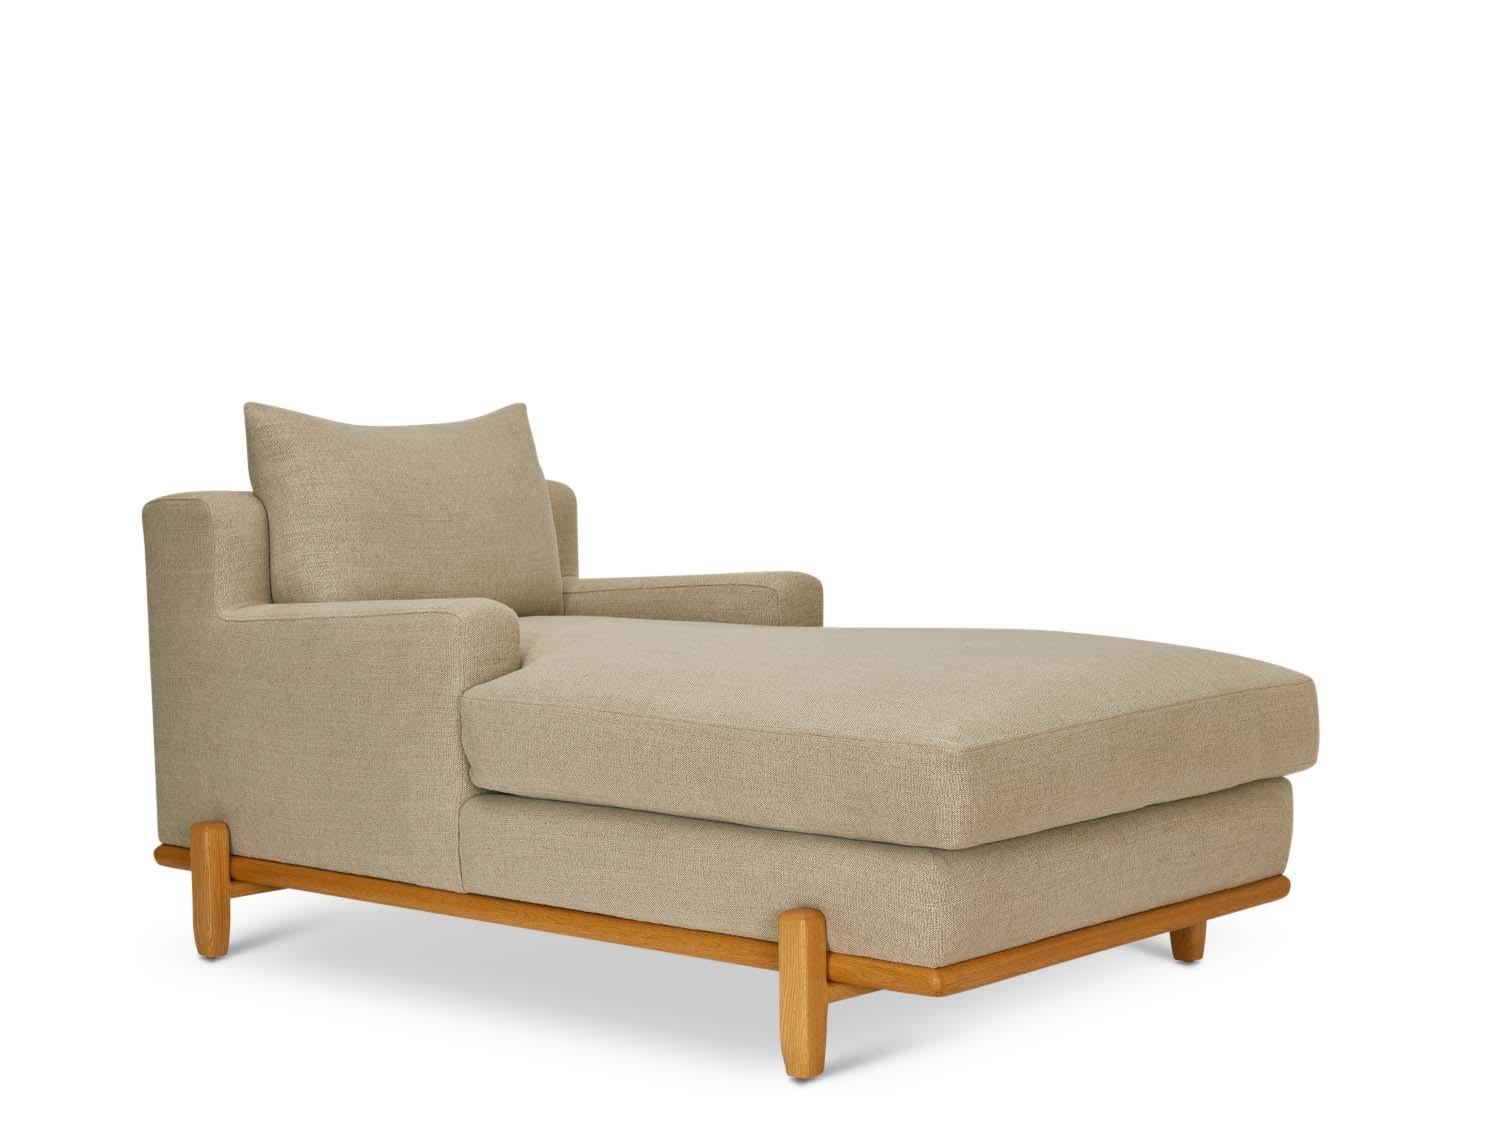 The George Chaise is part of the collaborative collection with interior designer Brian Paquette. The George Chaise is a low-profile, but wide-scale chaise that rests on top of a solid wood base.

The Lawson-Fenning Collection is designed and